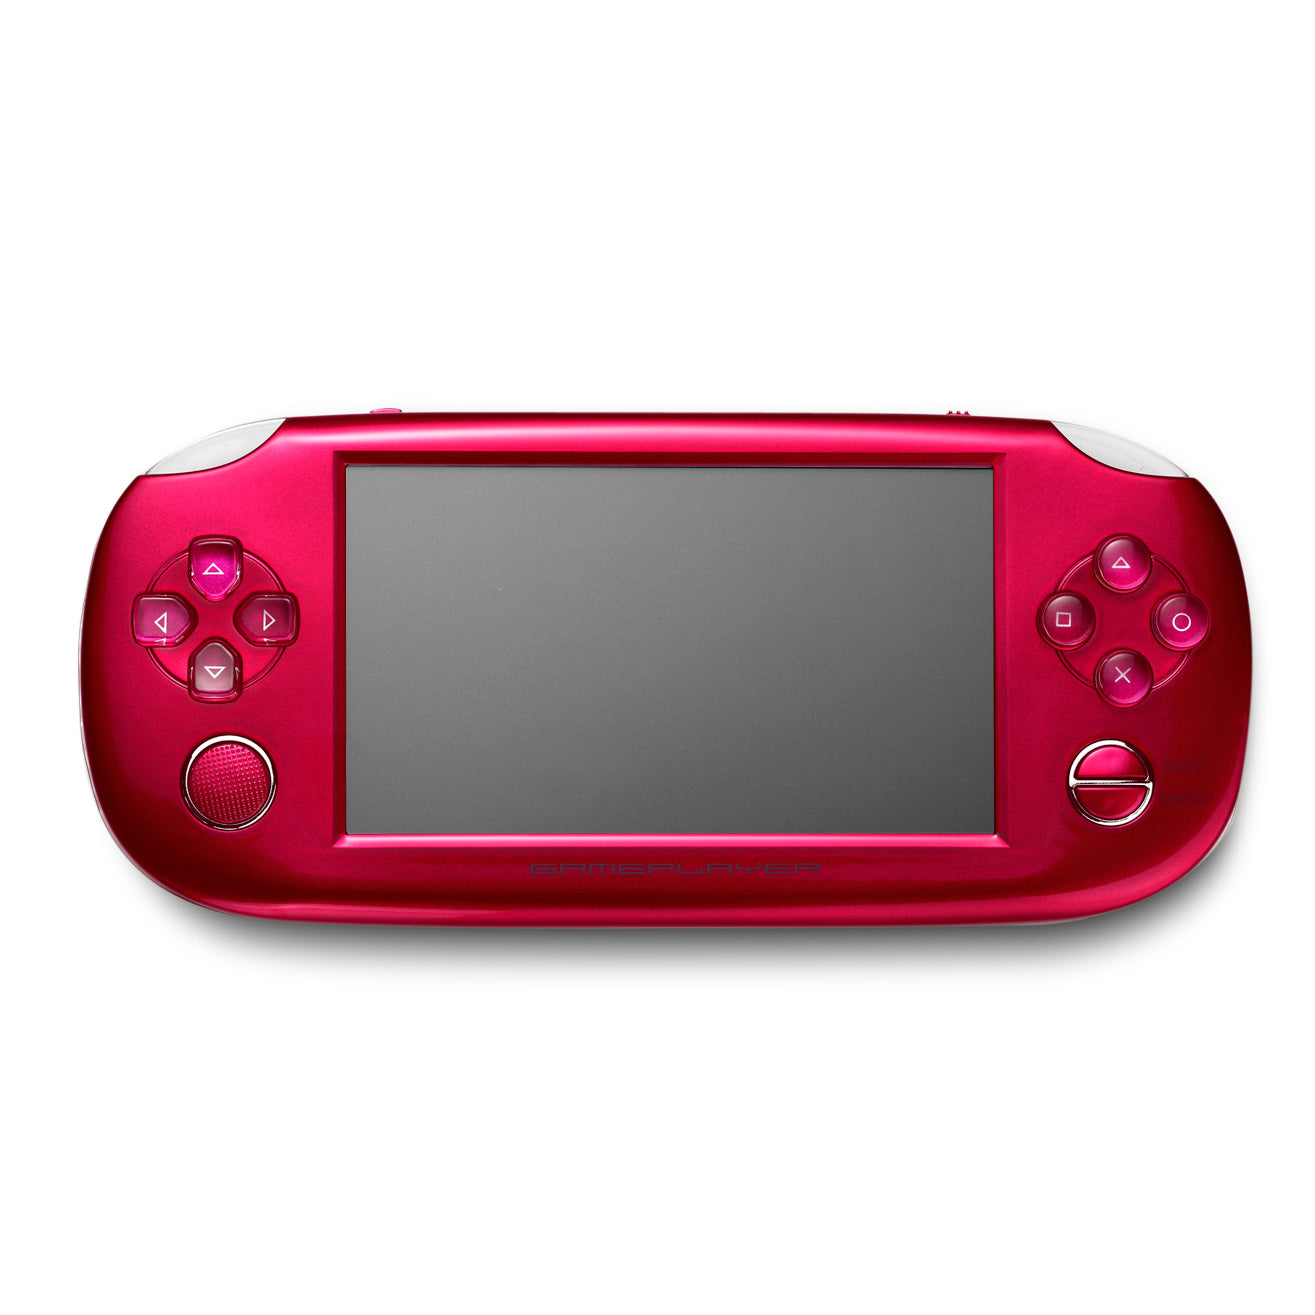 4.3 inch PSP Style Games Playstation Handheld Portable Game Console MP4/MP5 Media Player - Red / US Plug